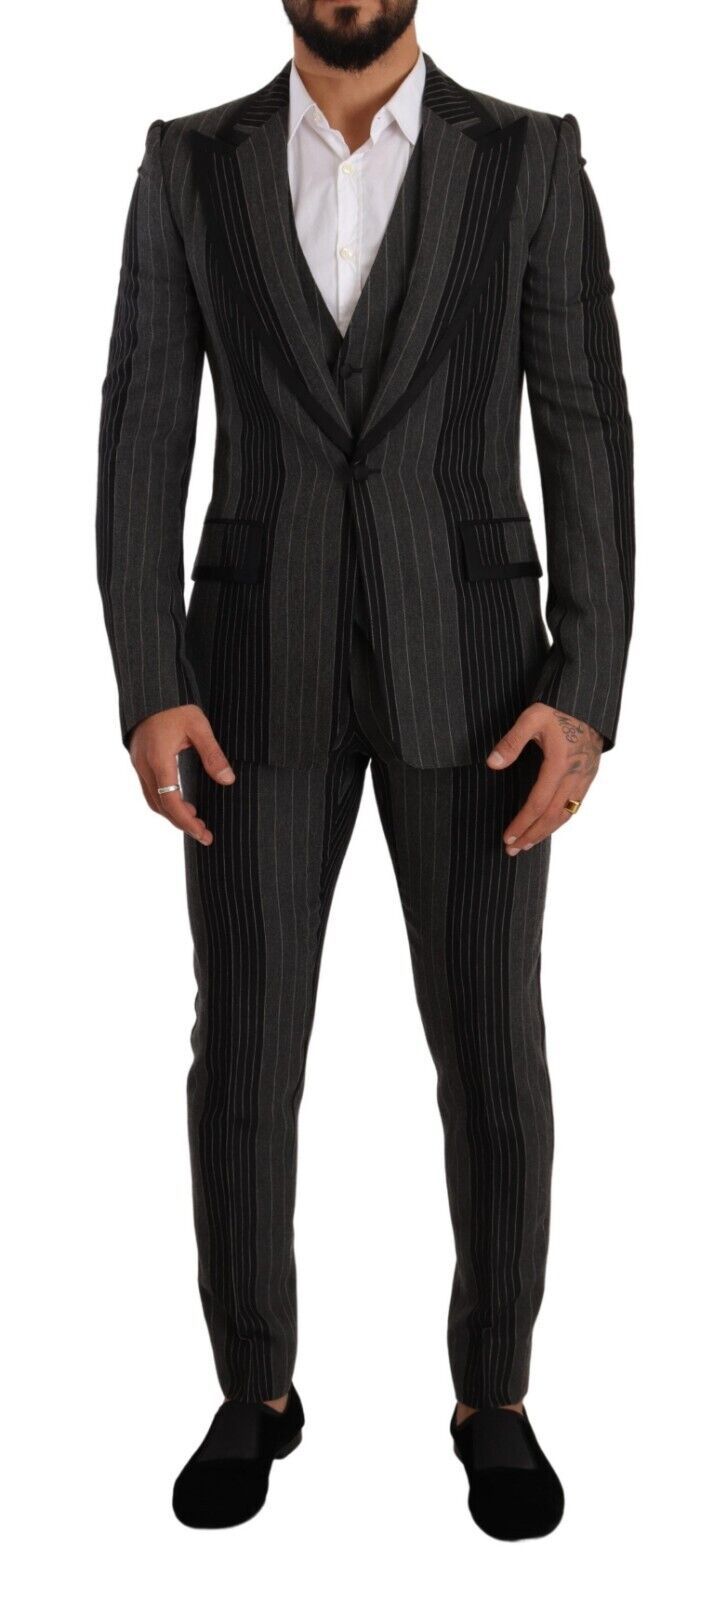 Black and Gray Dolce & Gabbana Black Gray Striped Slim Fit 3 Piece Suit